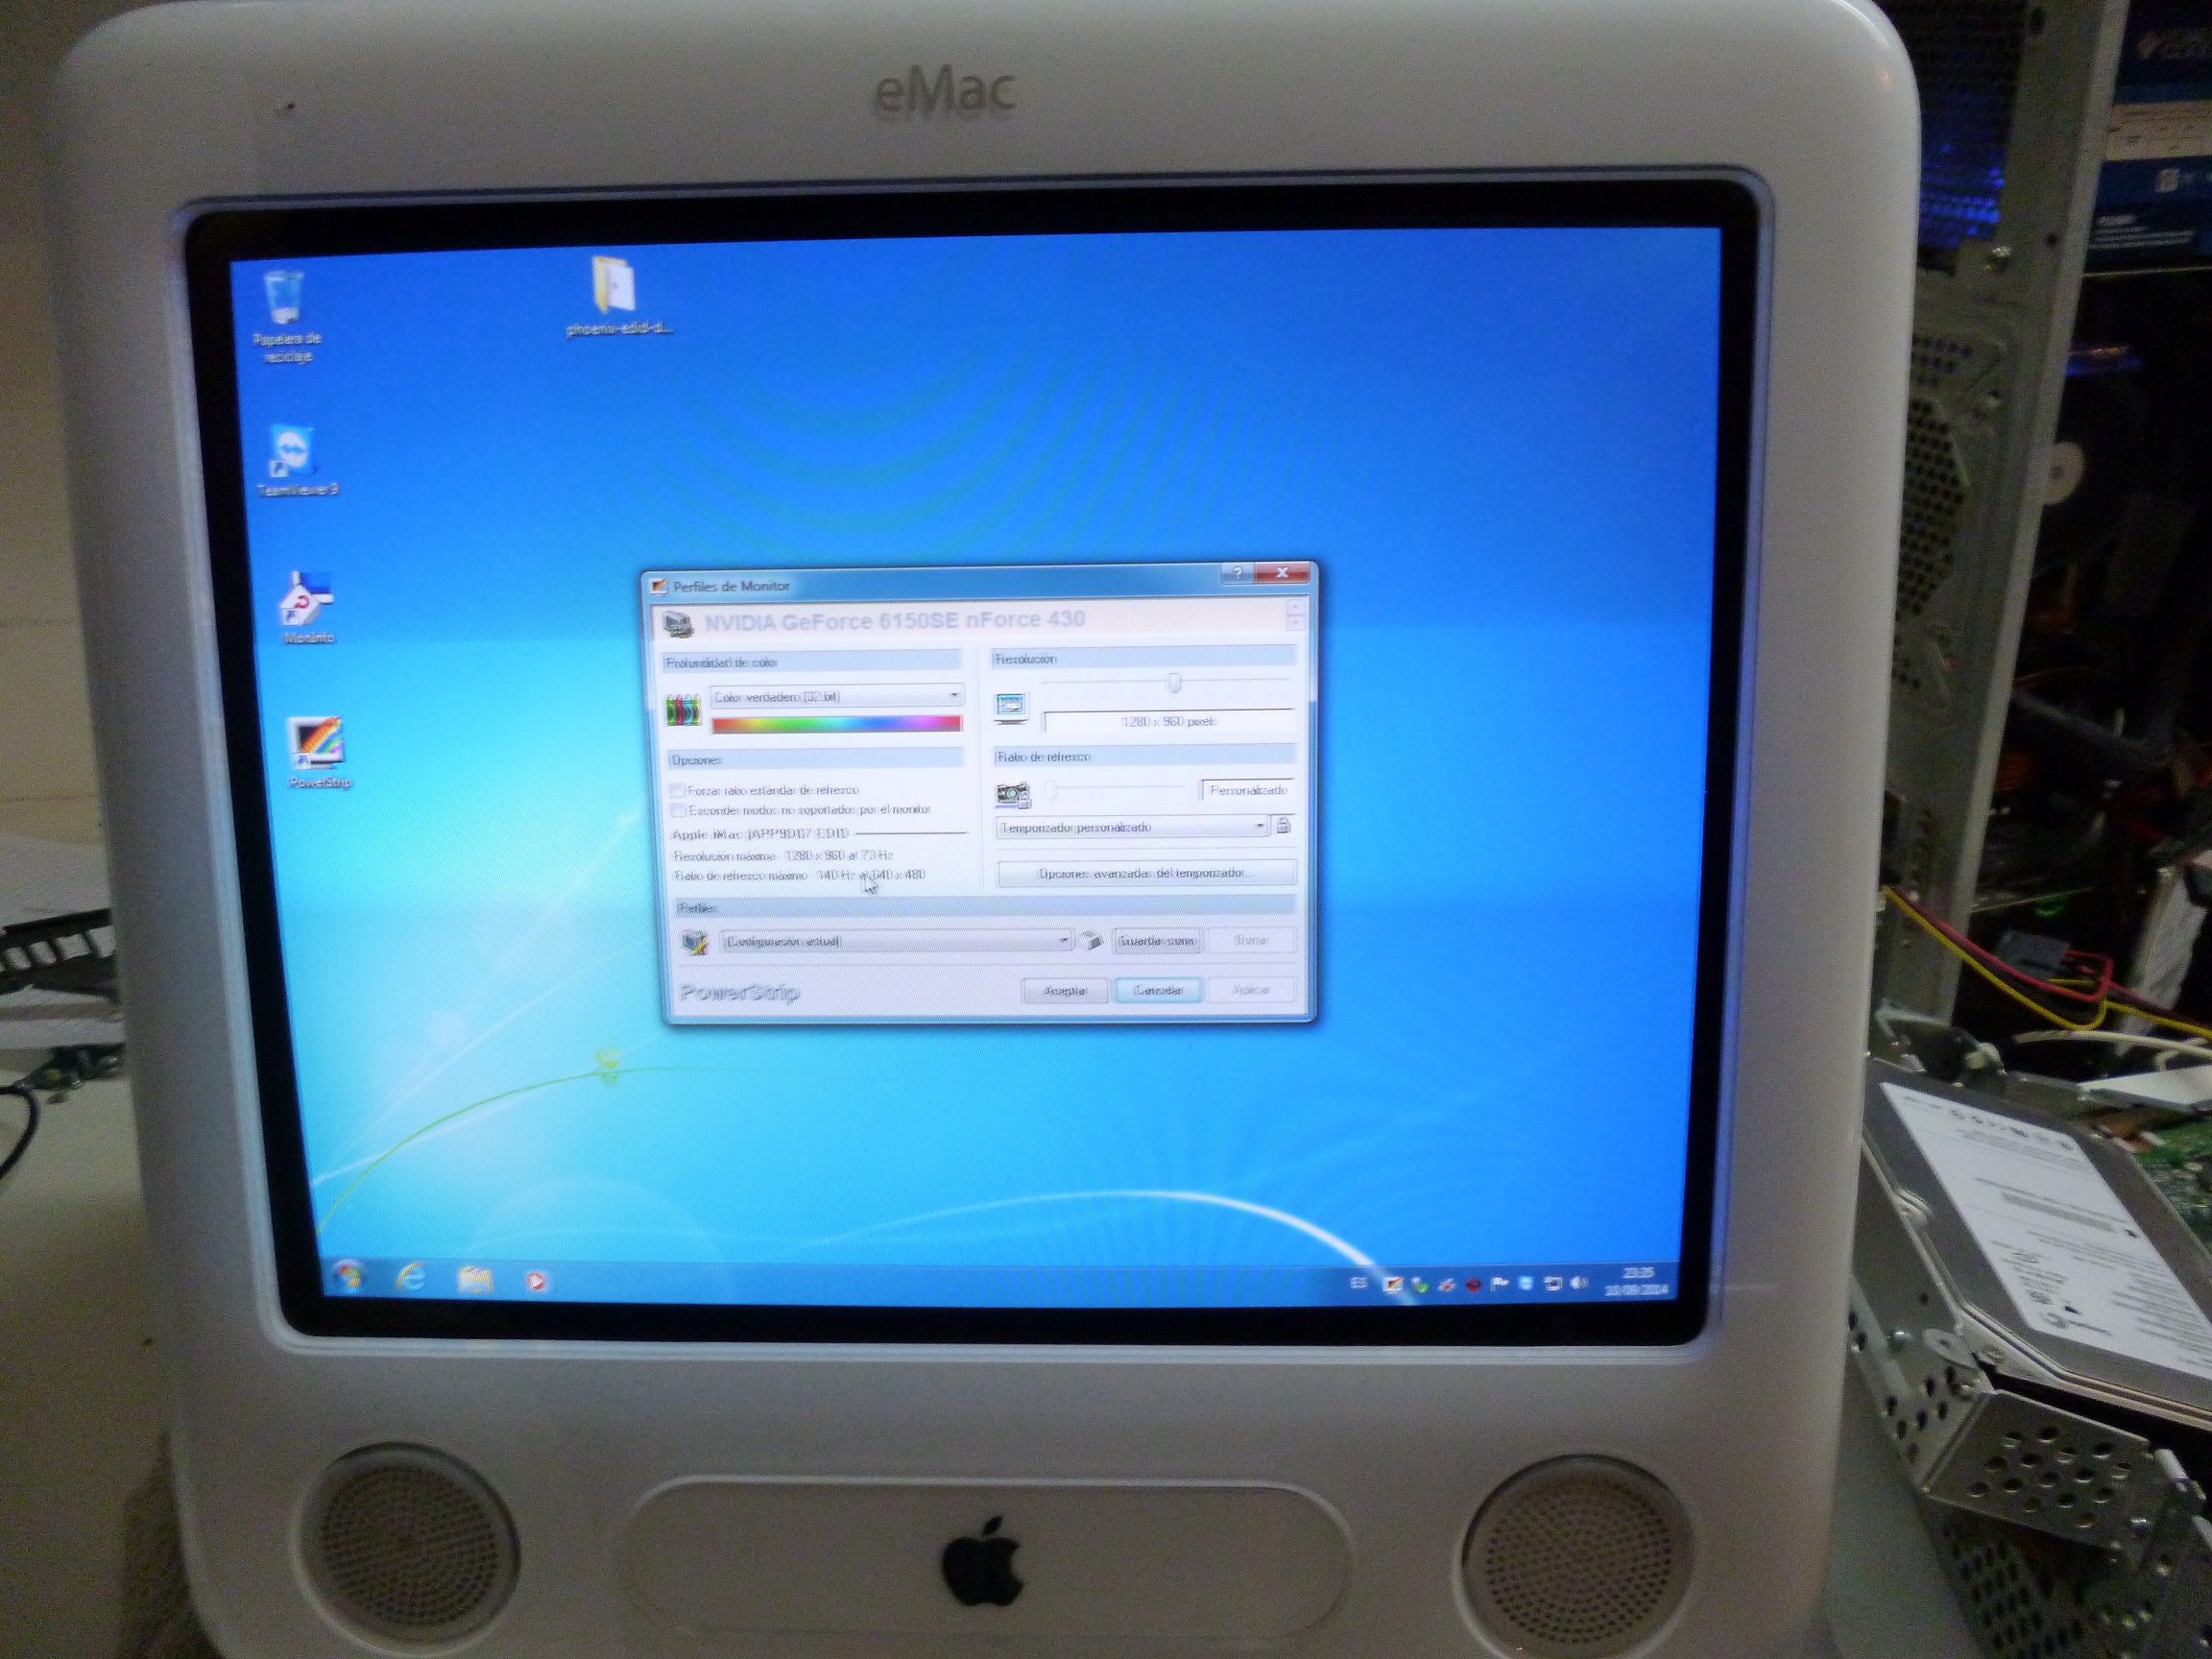 The Emac Crt As Being Hacked Long Live The Emac Macrumors Forums